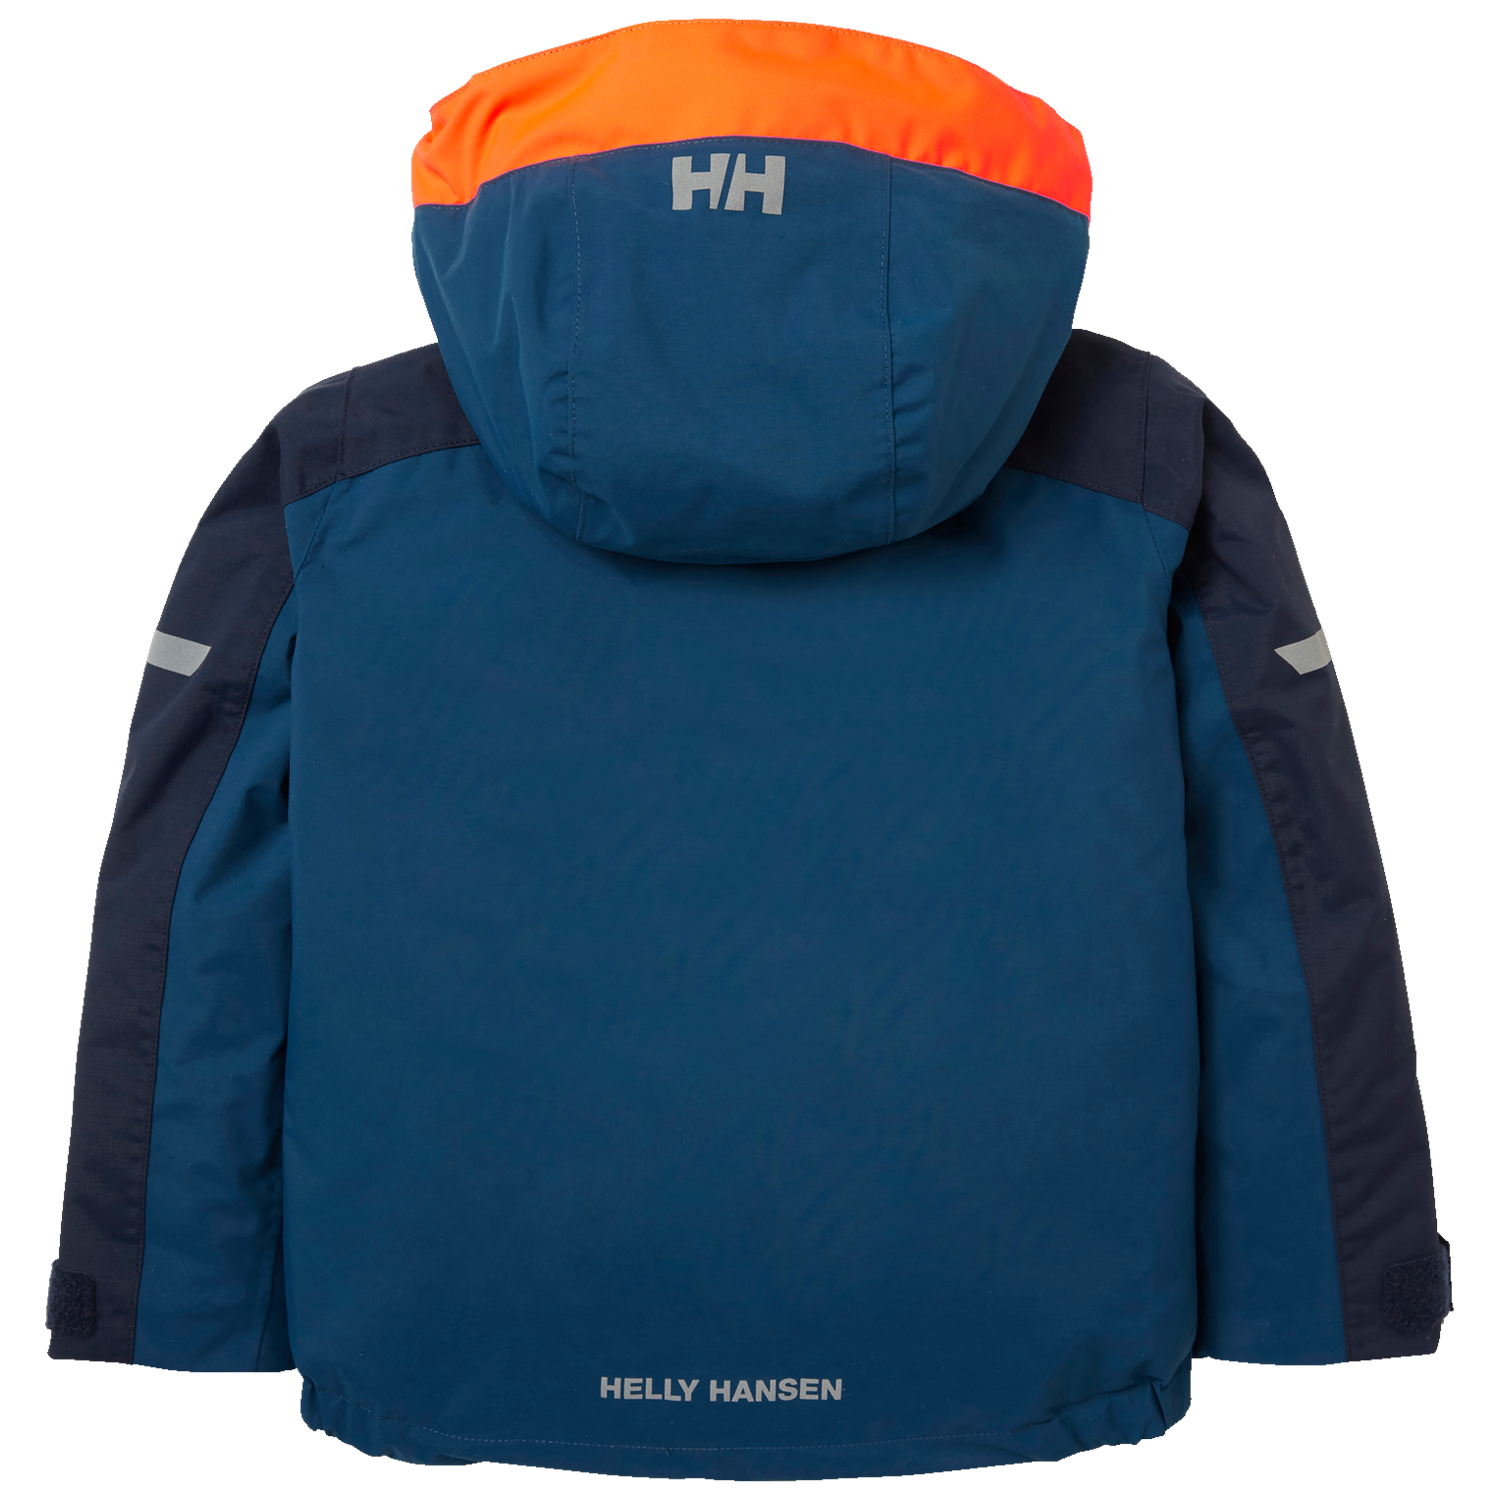 Helly Hansen Legend 2.0 Insulated Jacket - Toddlers